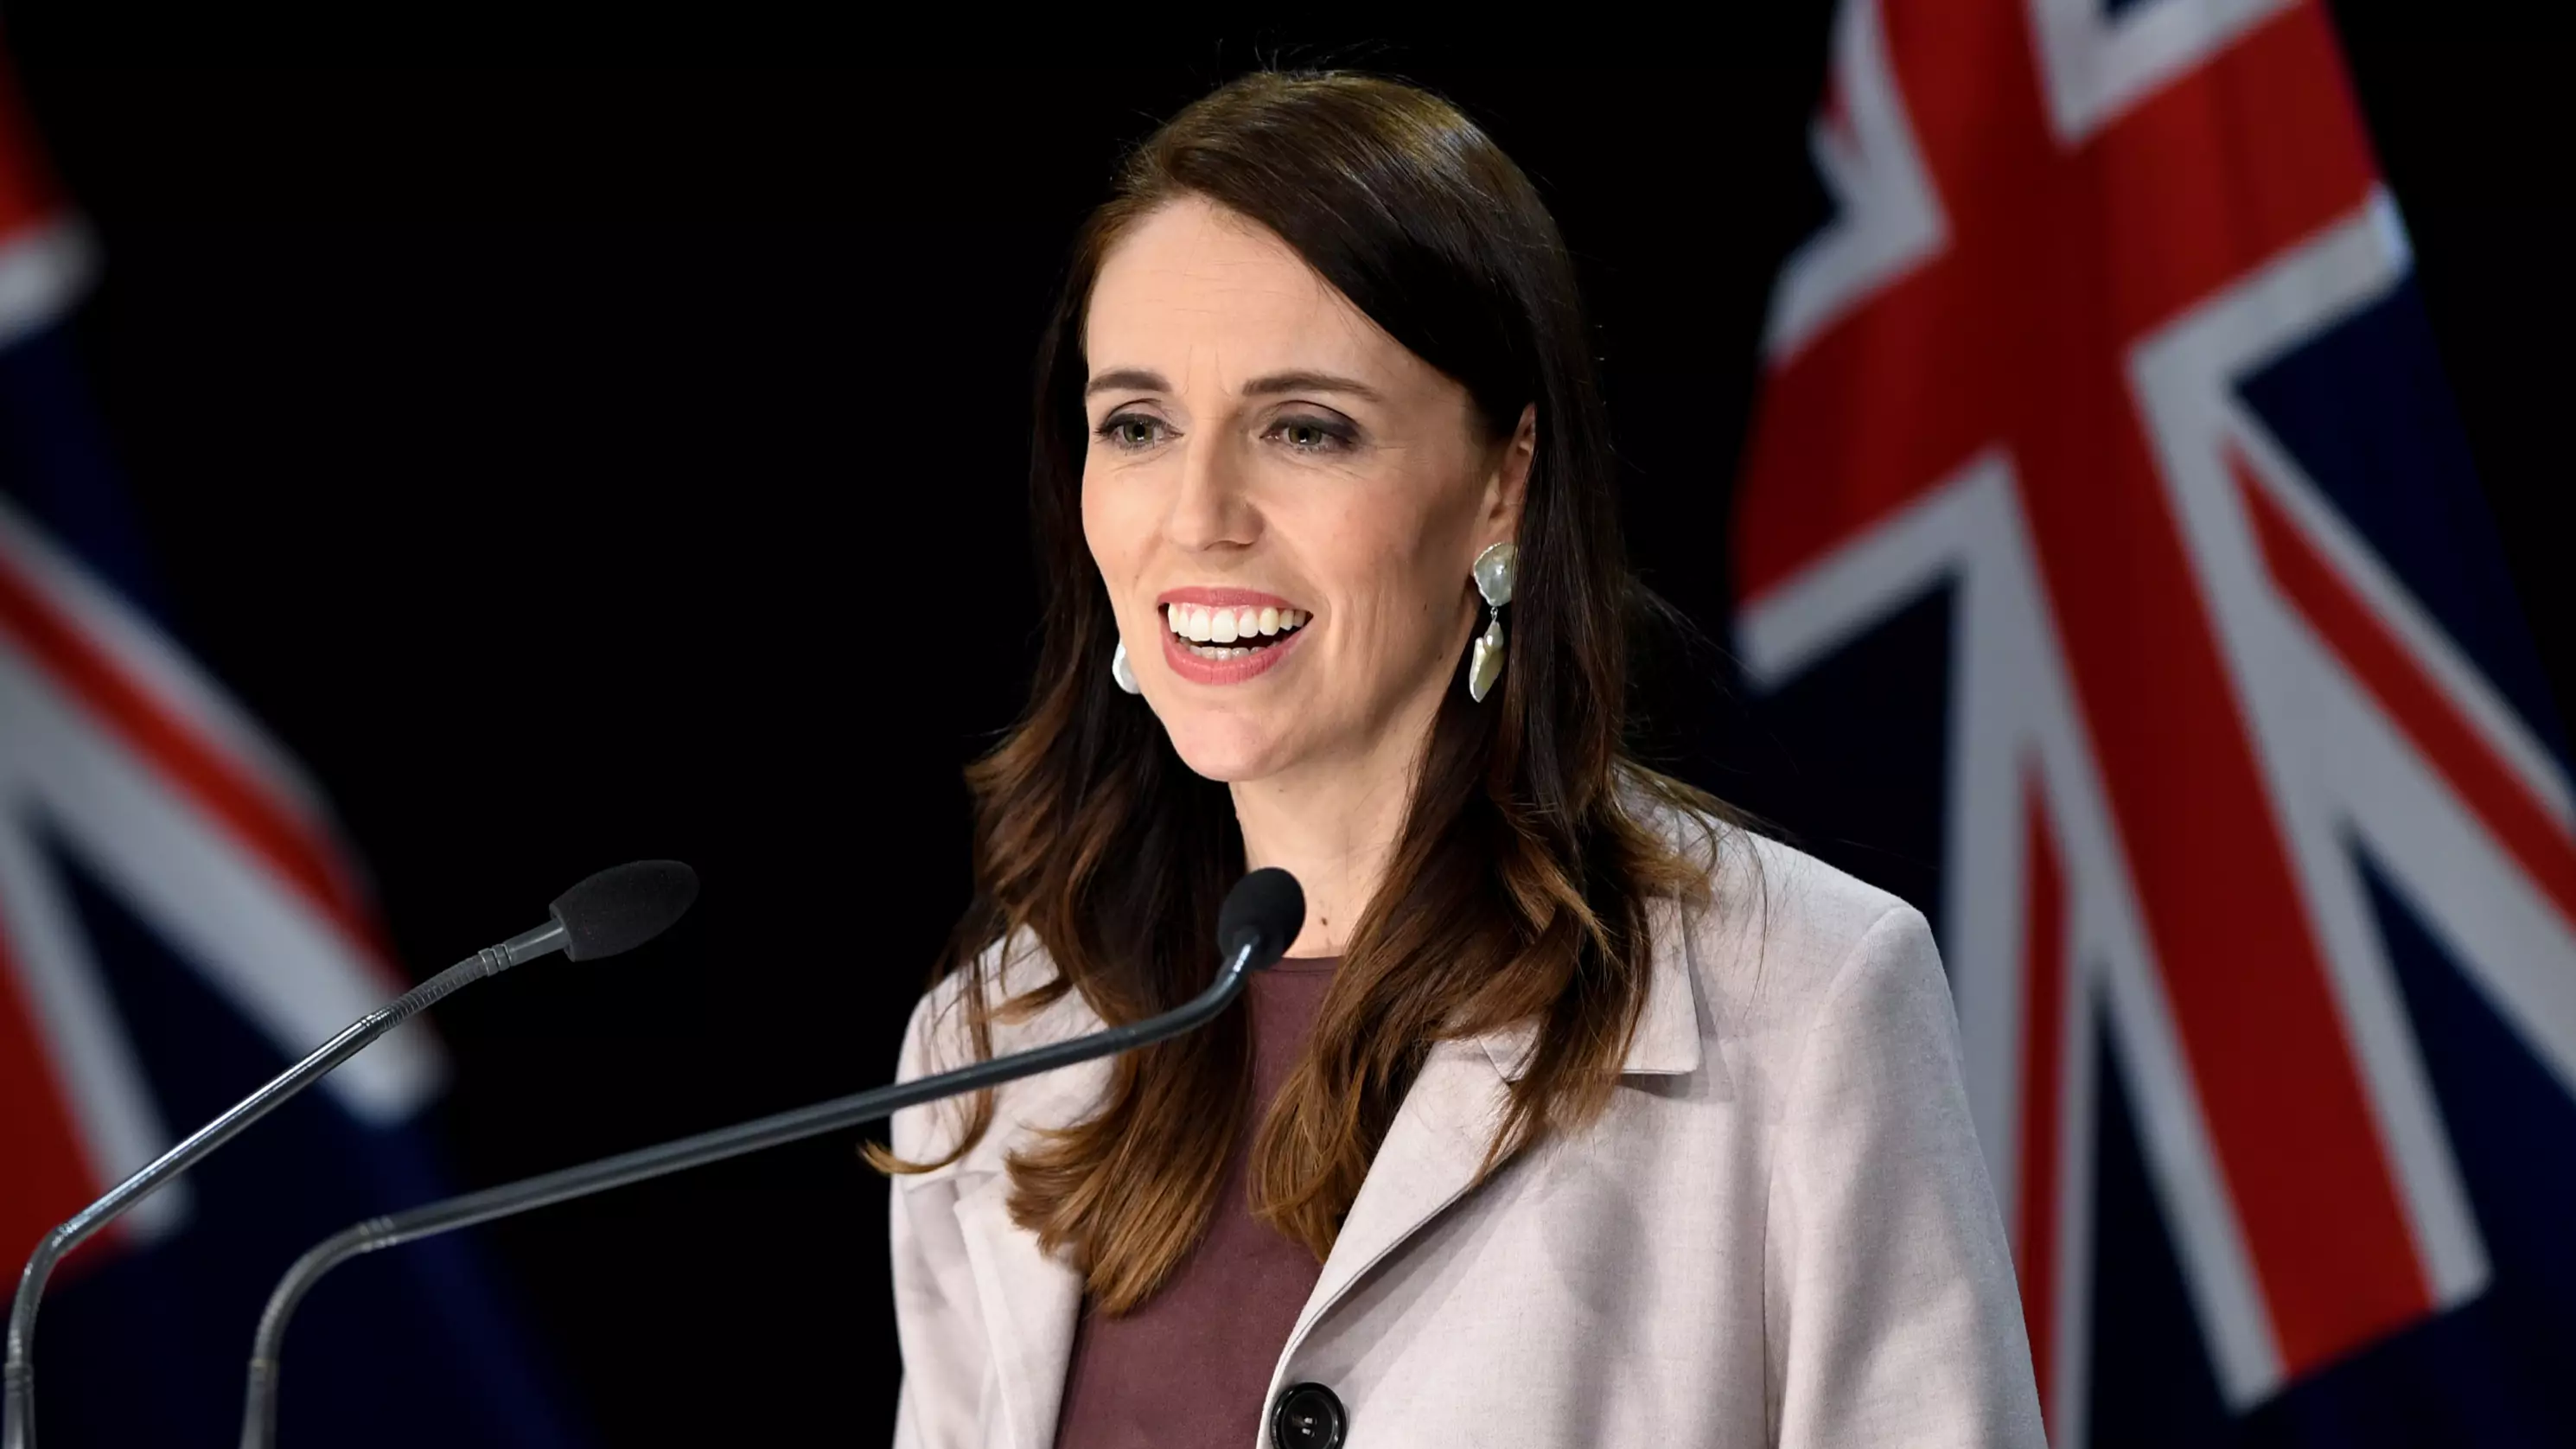 Jacinda Ardern Announces Free Sanitary Products For All New Zealand Schools